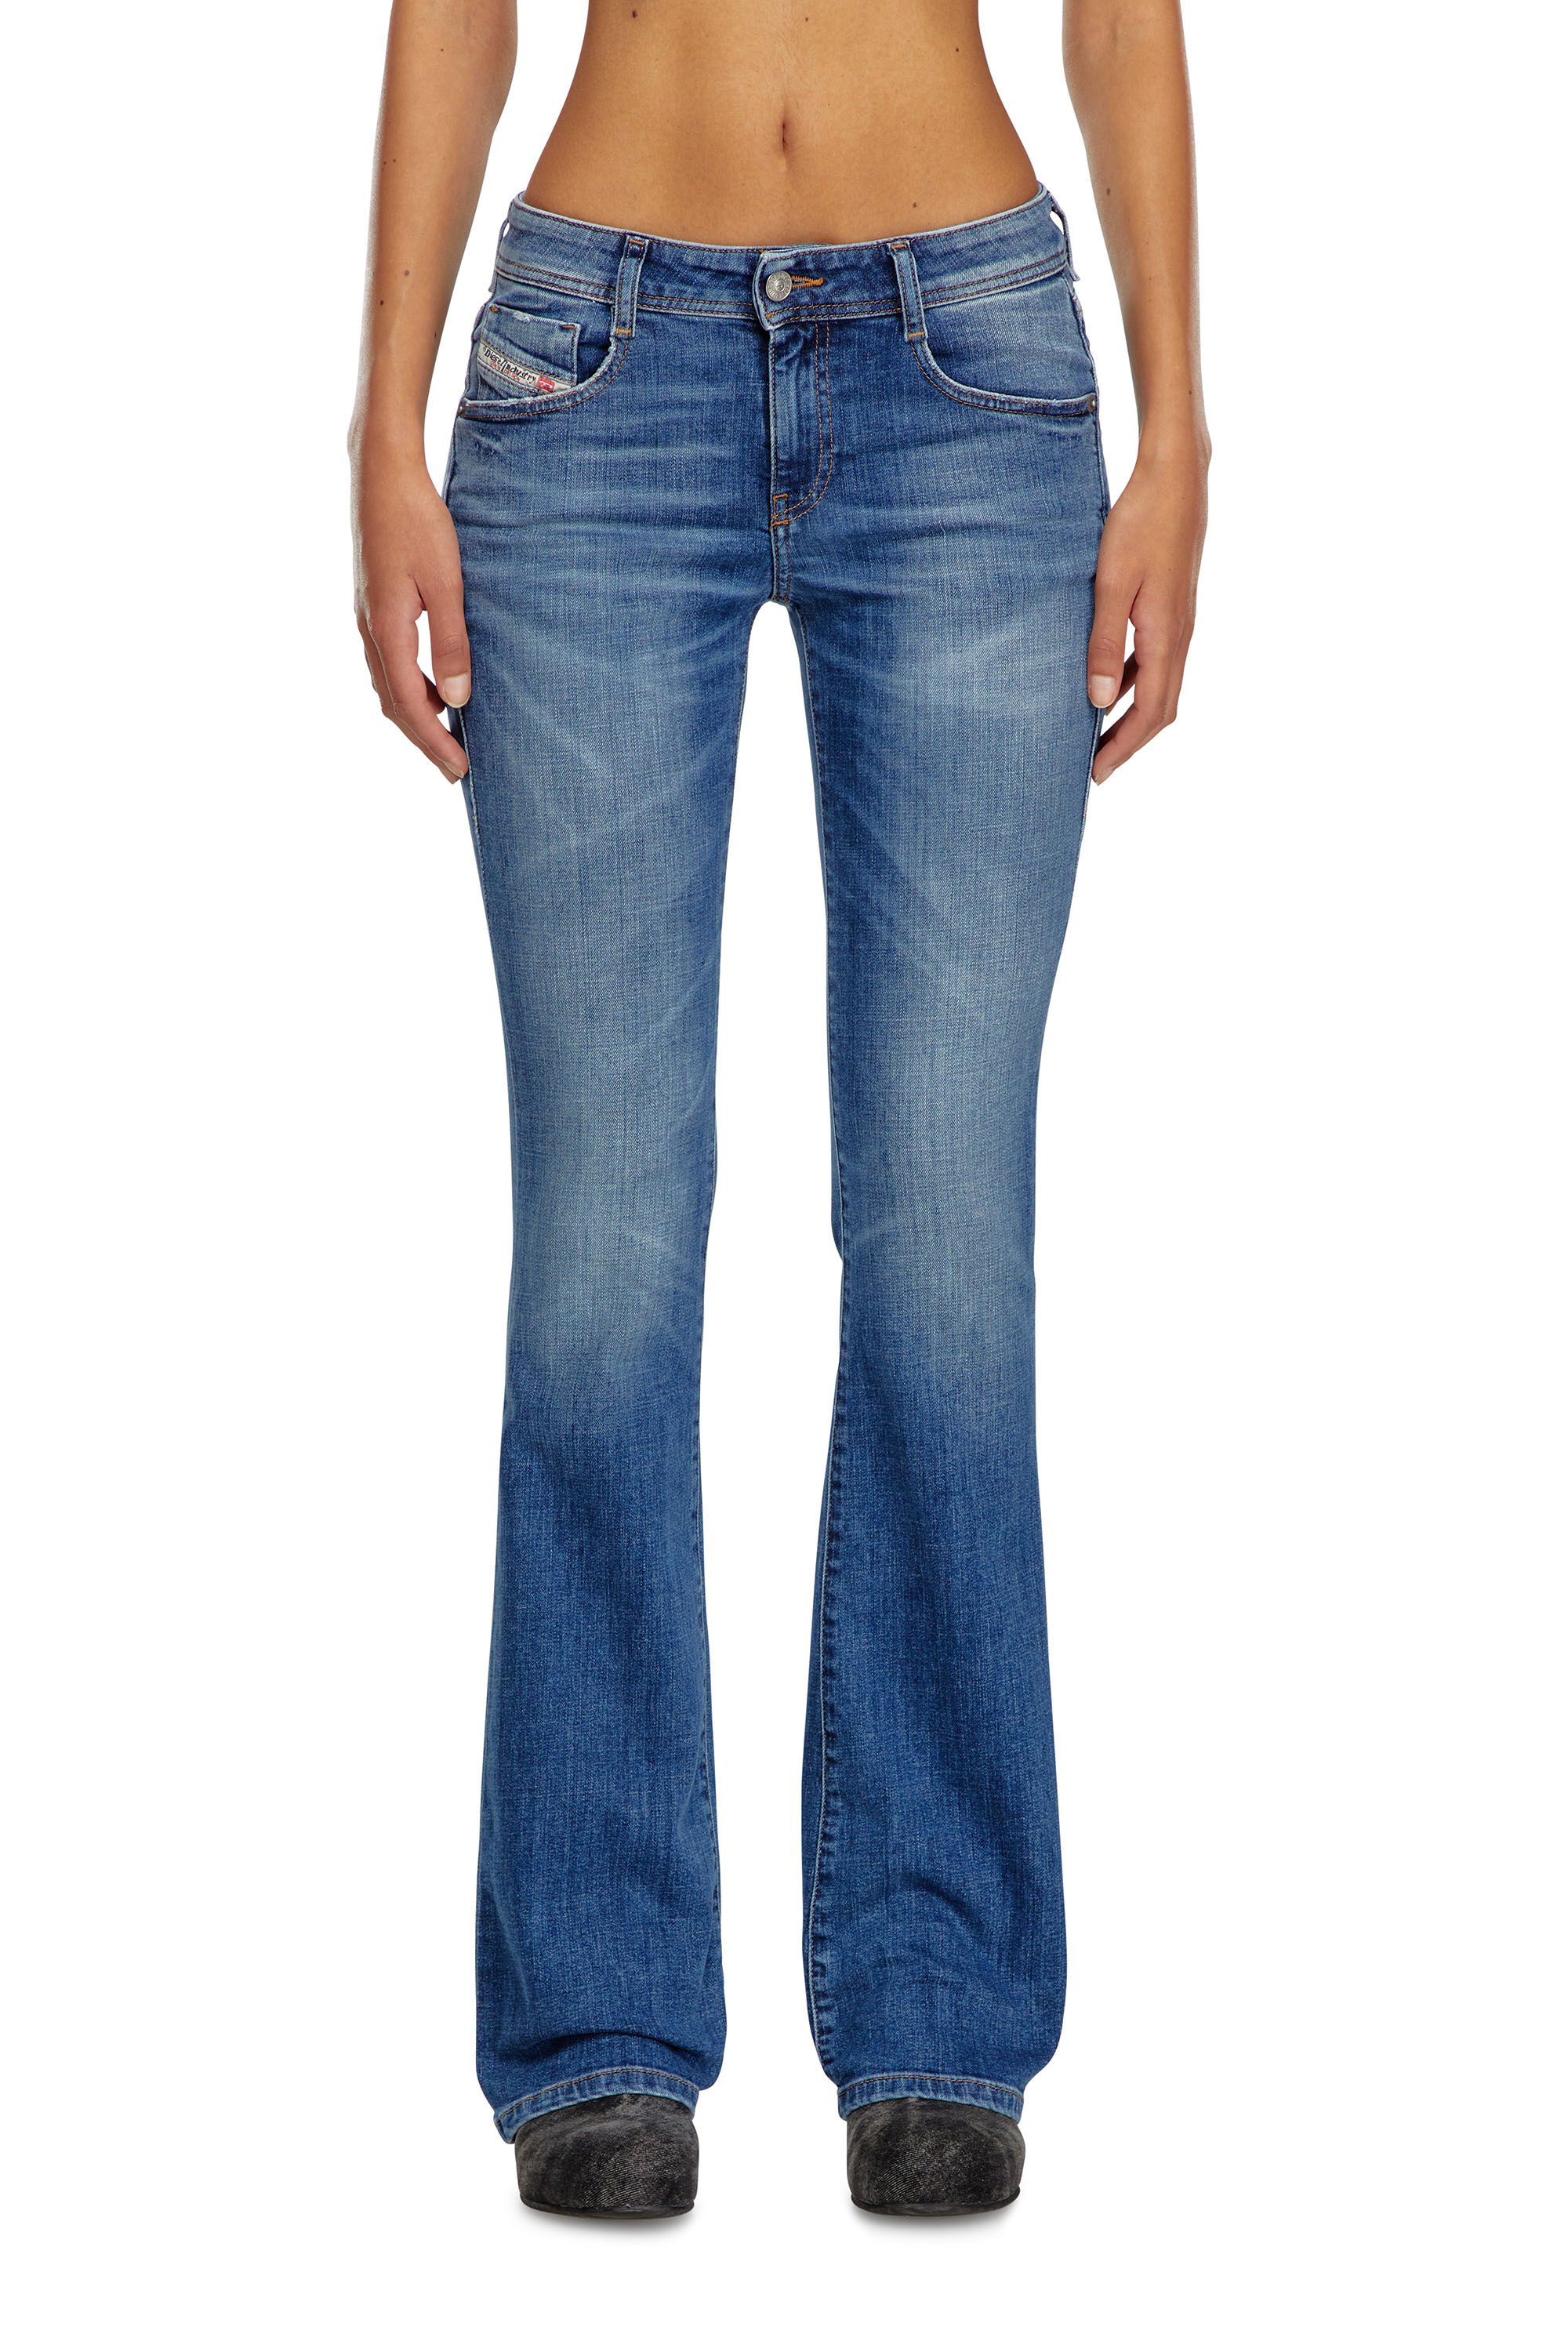 Diesel - Bootcut and Flare Jeans 1969 D-Ebbey 09J33, Mujer Bootcut y Flare Jeans - 1969 D-Ebbey in Azul marino - Image 3